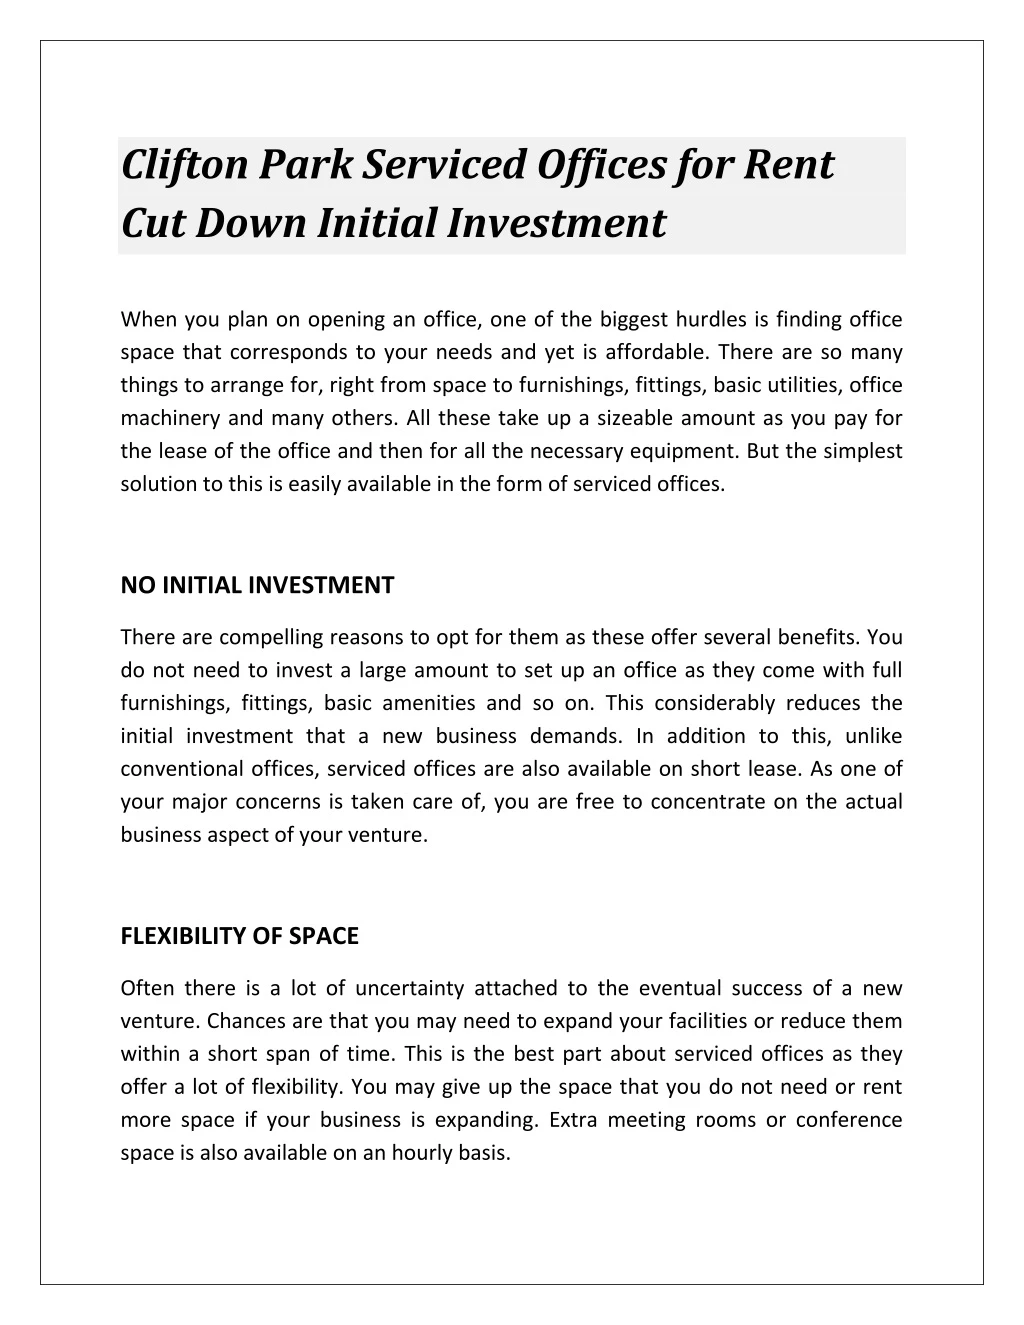 clifton park serviced offices for rent cut down